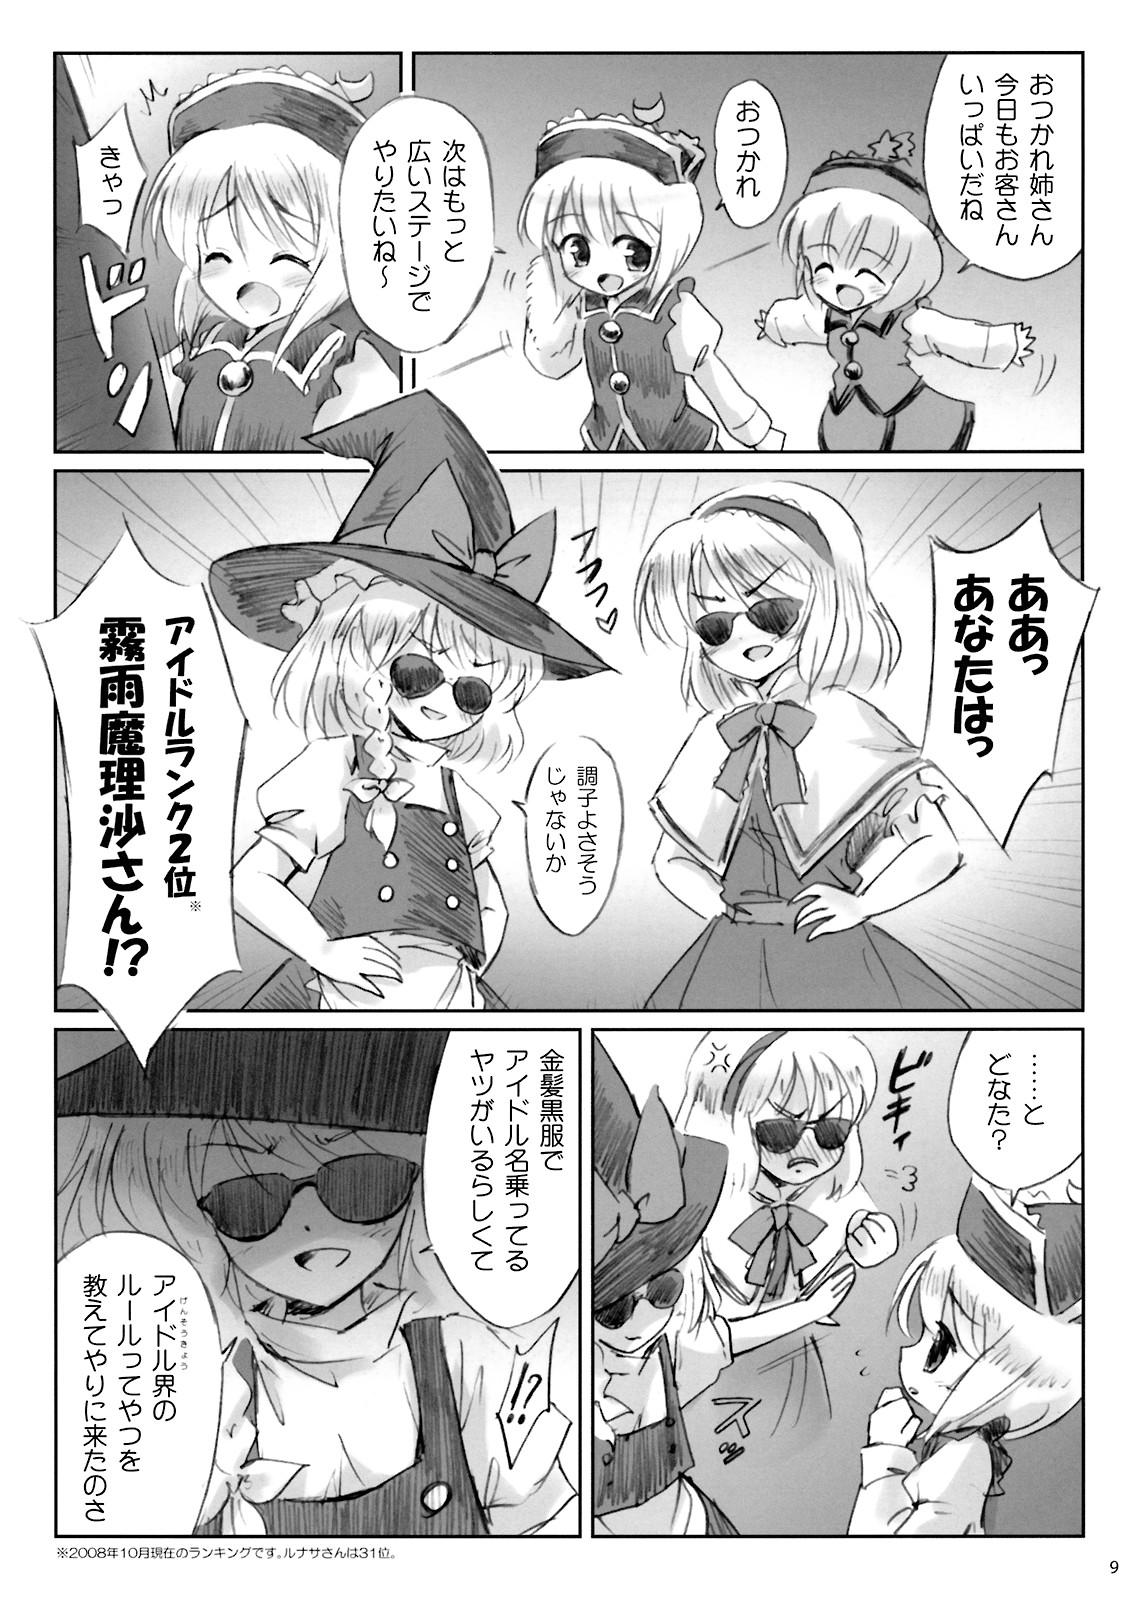 Young Old IDOLMASTER - Touhou project Fetish - Page 8